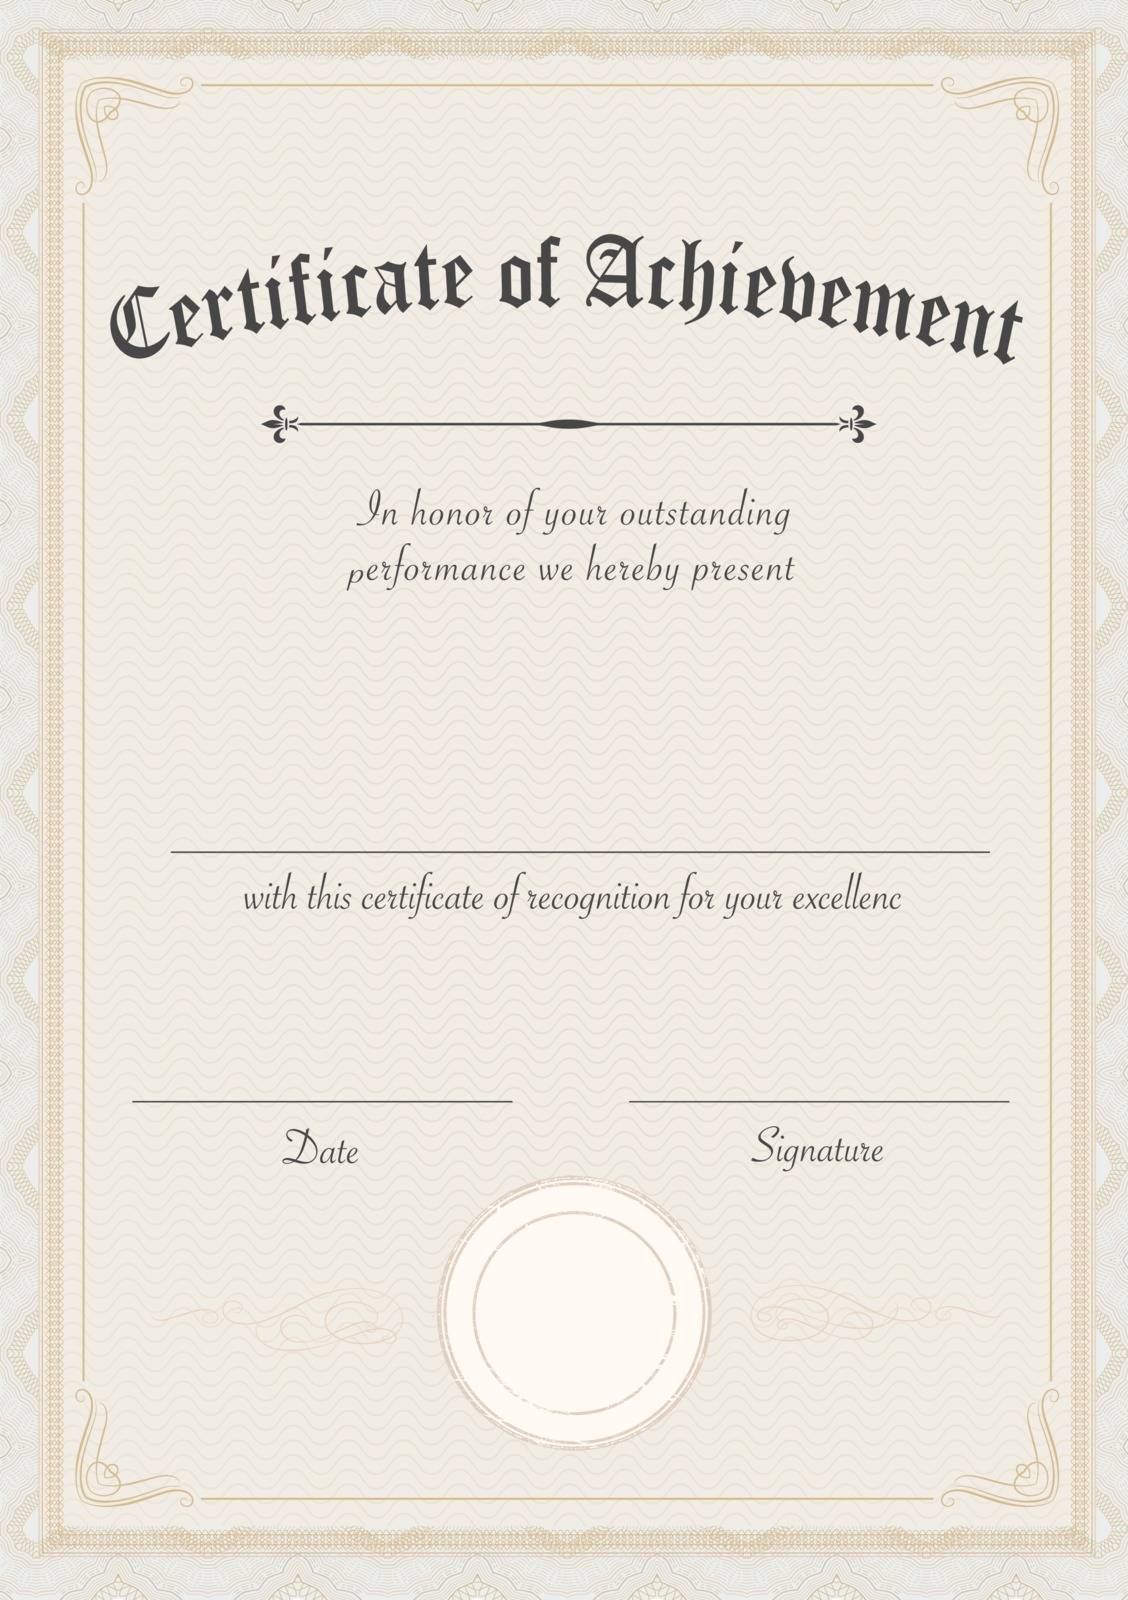 Vertical classic certificate of achievement paper template by cougarsan